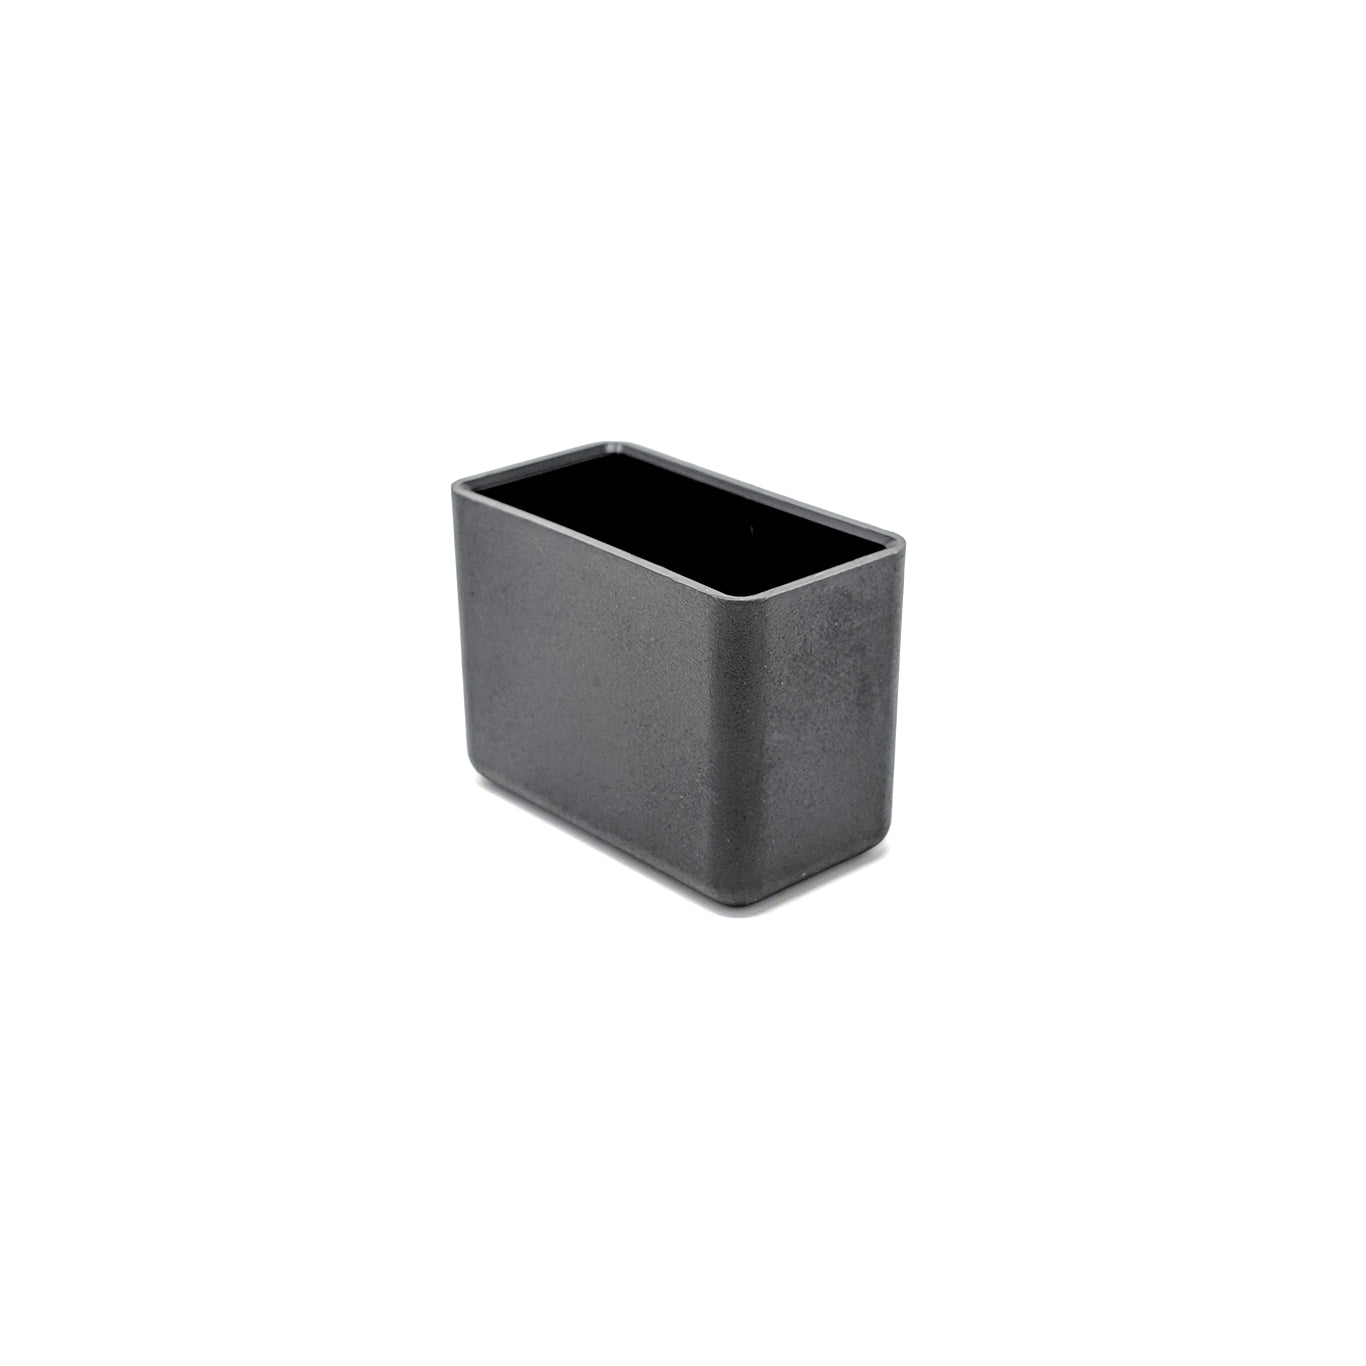 30x15mm Rectangle Plastic Ferrules End Caps for Tubes Pipes Made in Germany - Keay Vital Parts